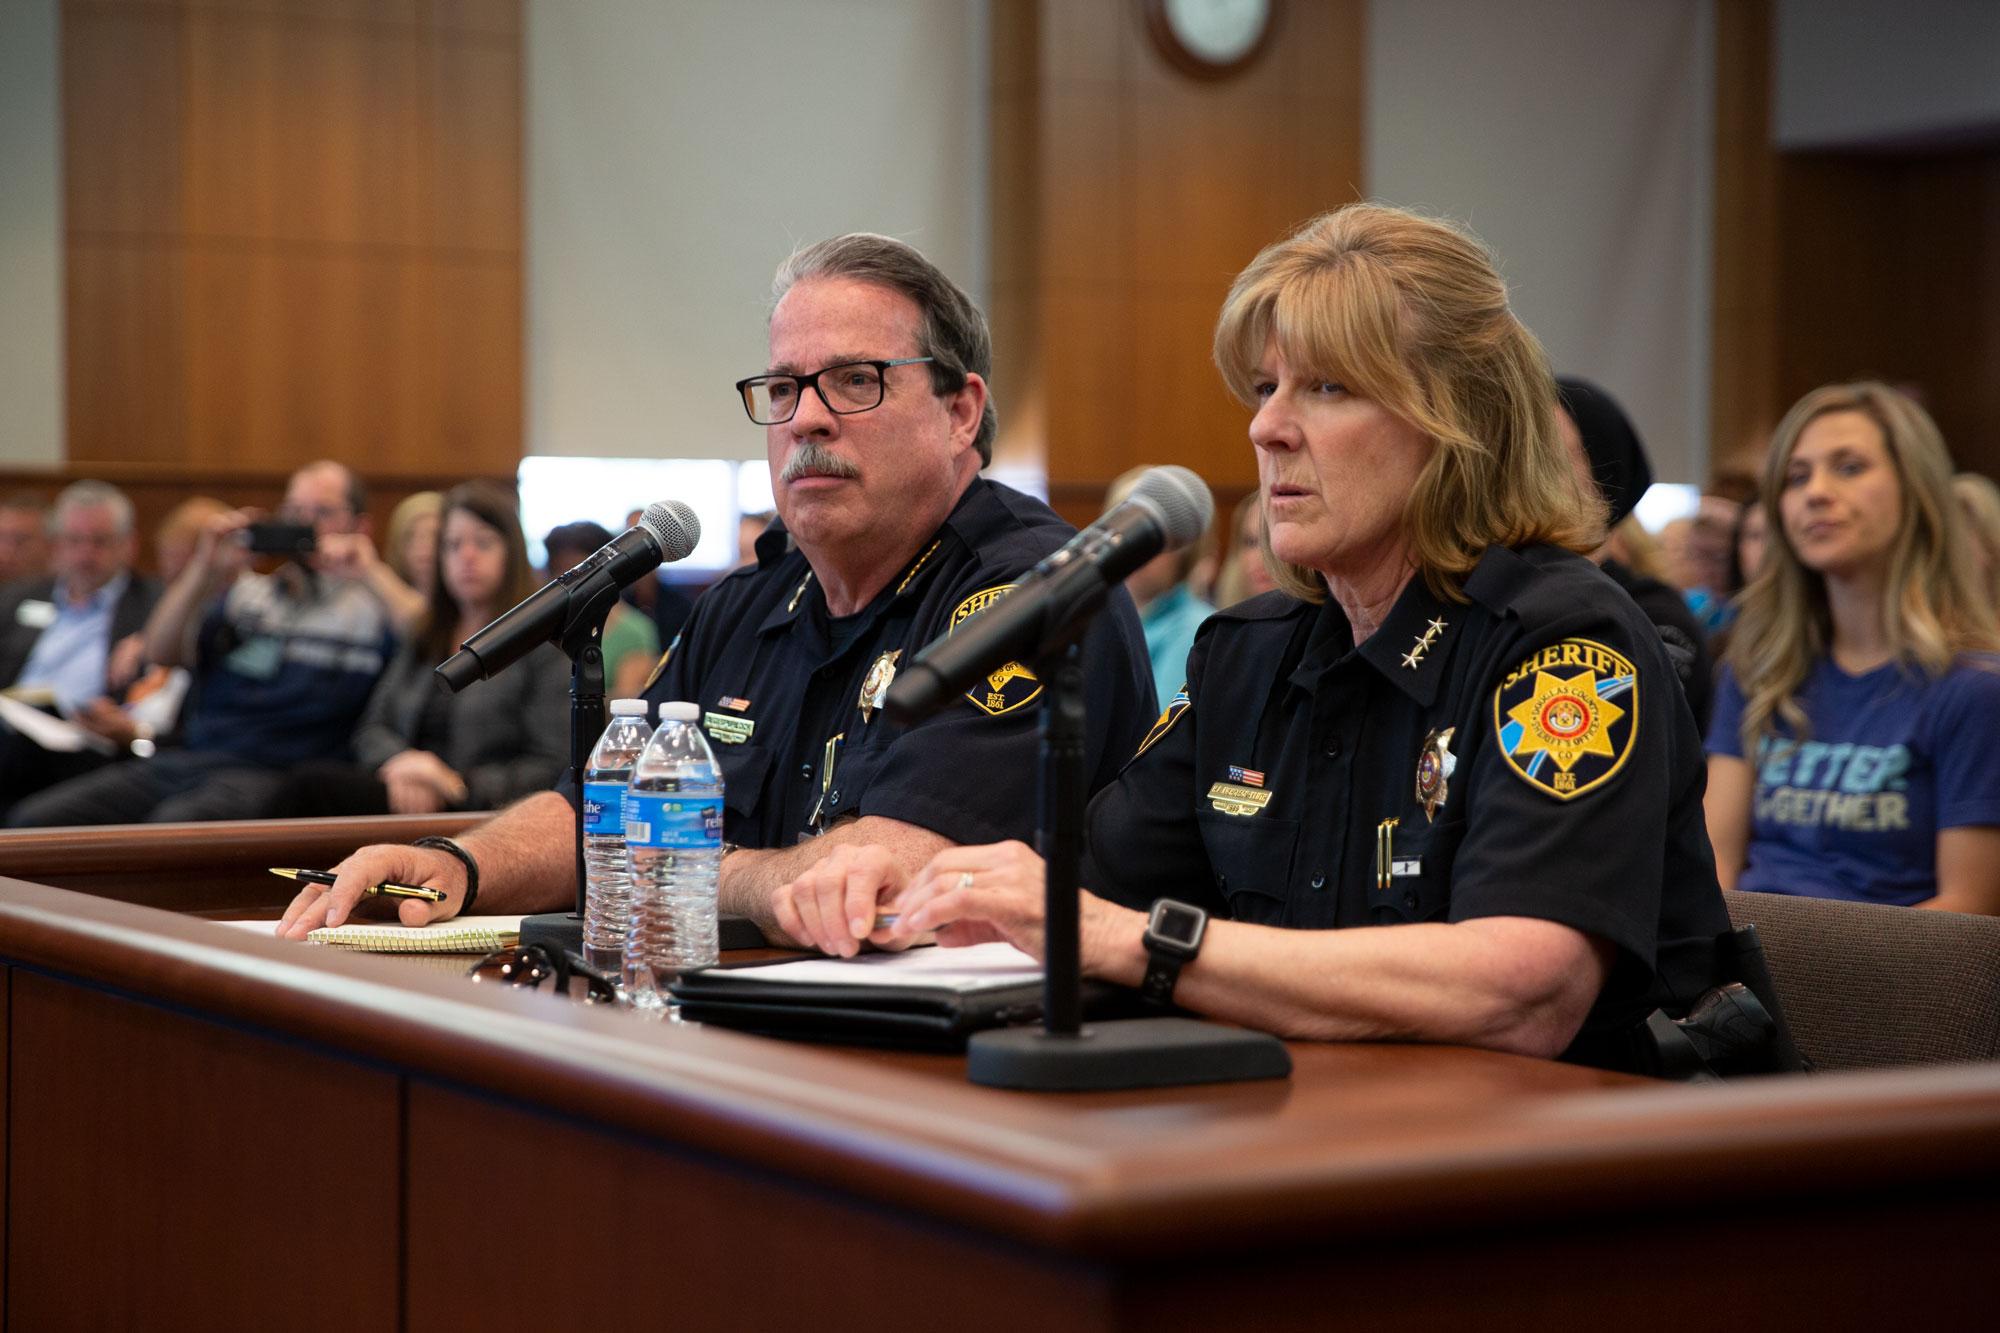 Former Sheriff Tony Spurlock and former Undersheriff Holly Nicholson-Kluth at a Douglas County Commissioners meeting.